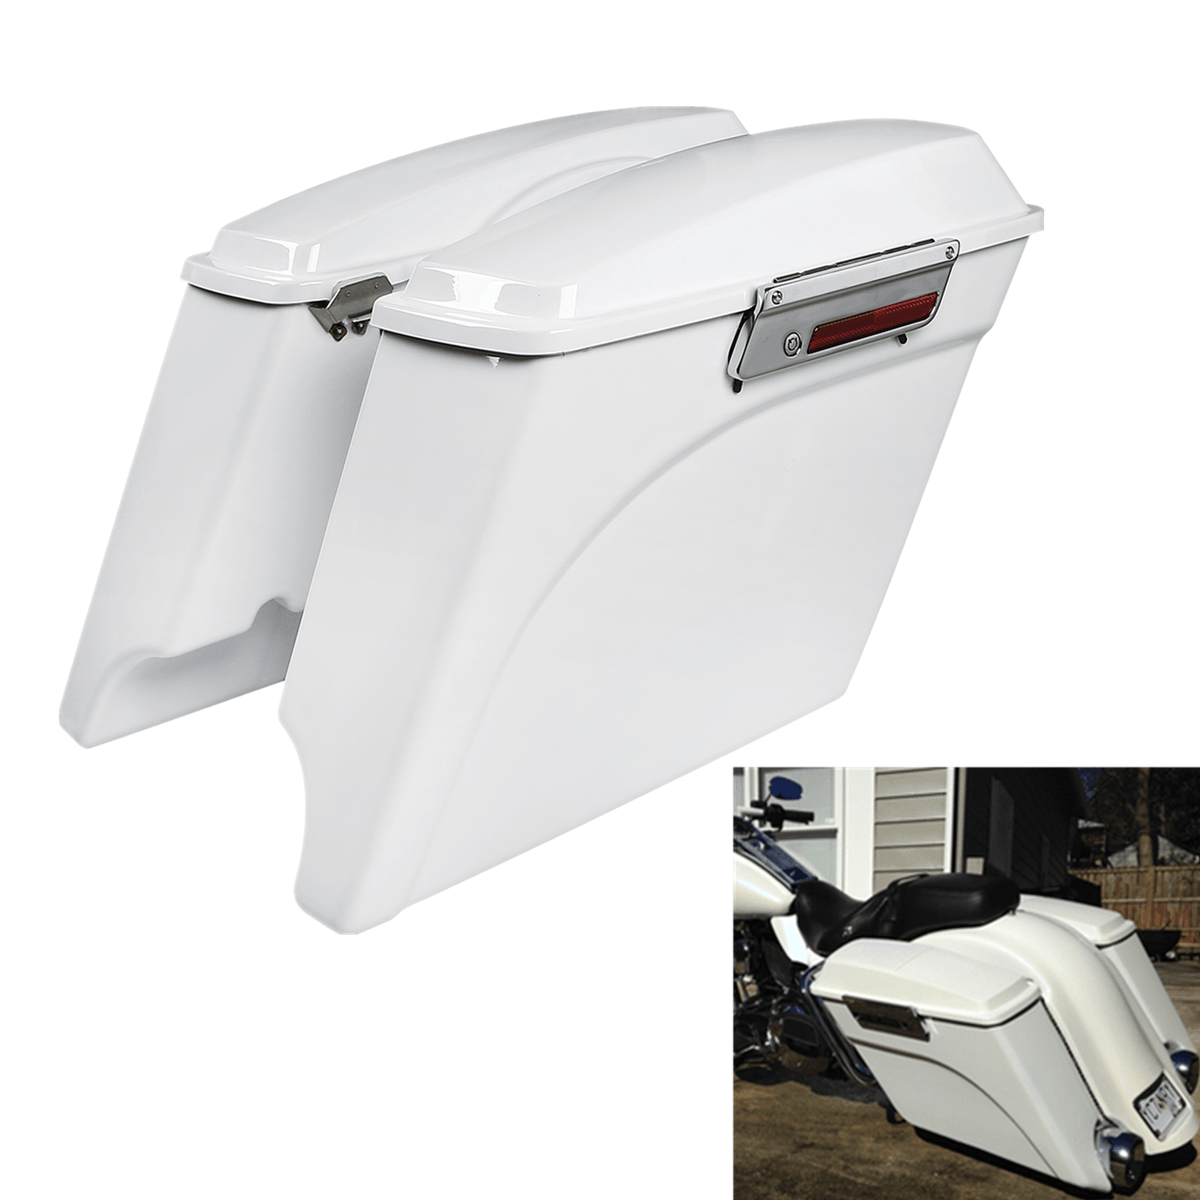 5" Stretched Saddlebags w/Lid Latches Fit For Harley Street Electra Glide 93-13 - Moto Life Products